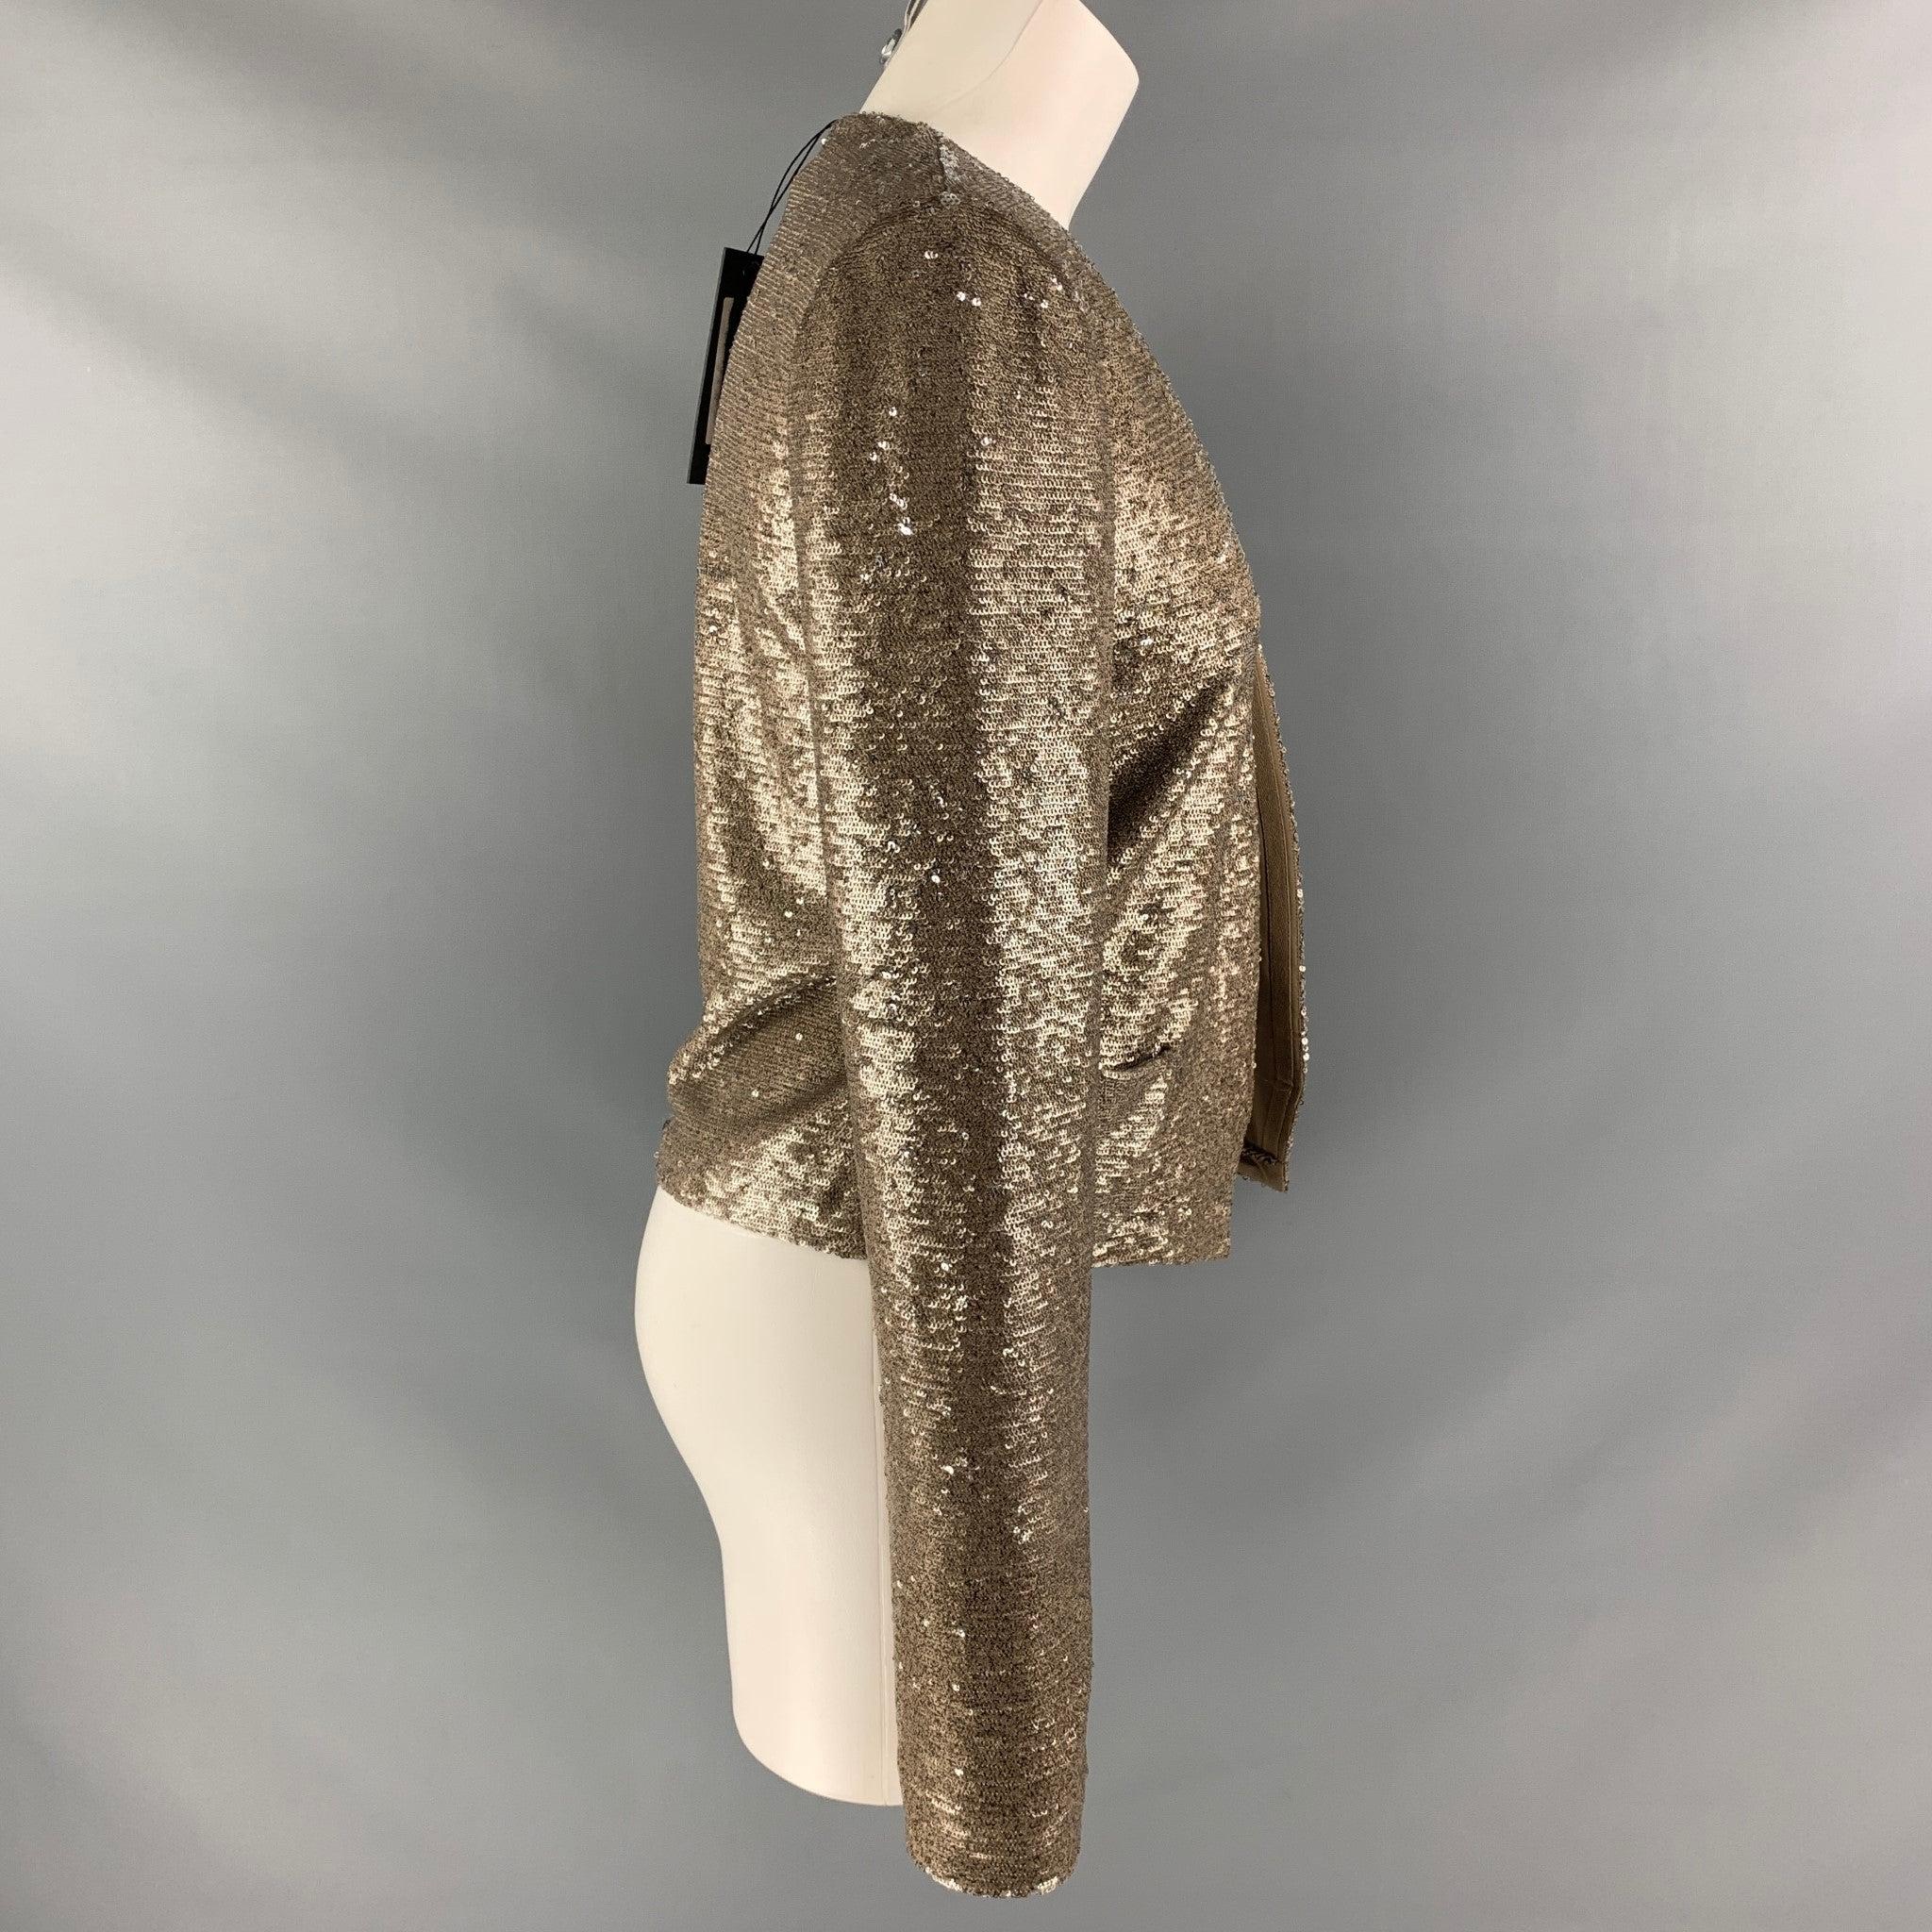 RACHEL ZOE jacket comes in gold polyester and spandex sequined fabric featuring two patch pockets at front. New with Tags. 

Marked:   2 

Measurements: 
 
Shoulder: 15 inBust: 32 inSleeve: 28 inLength: 20.5 in

  
  
 
Reference: 112900
Category: